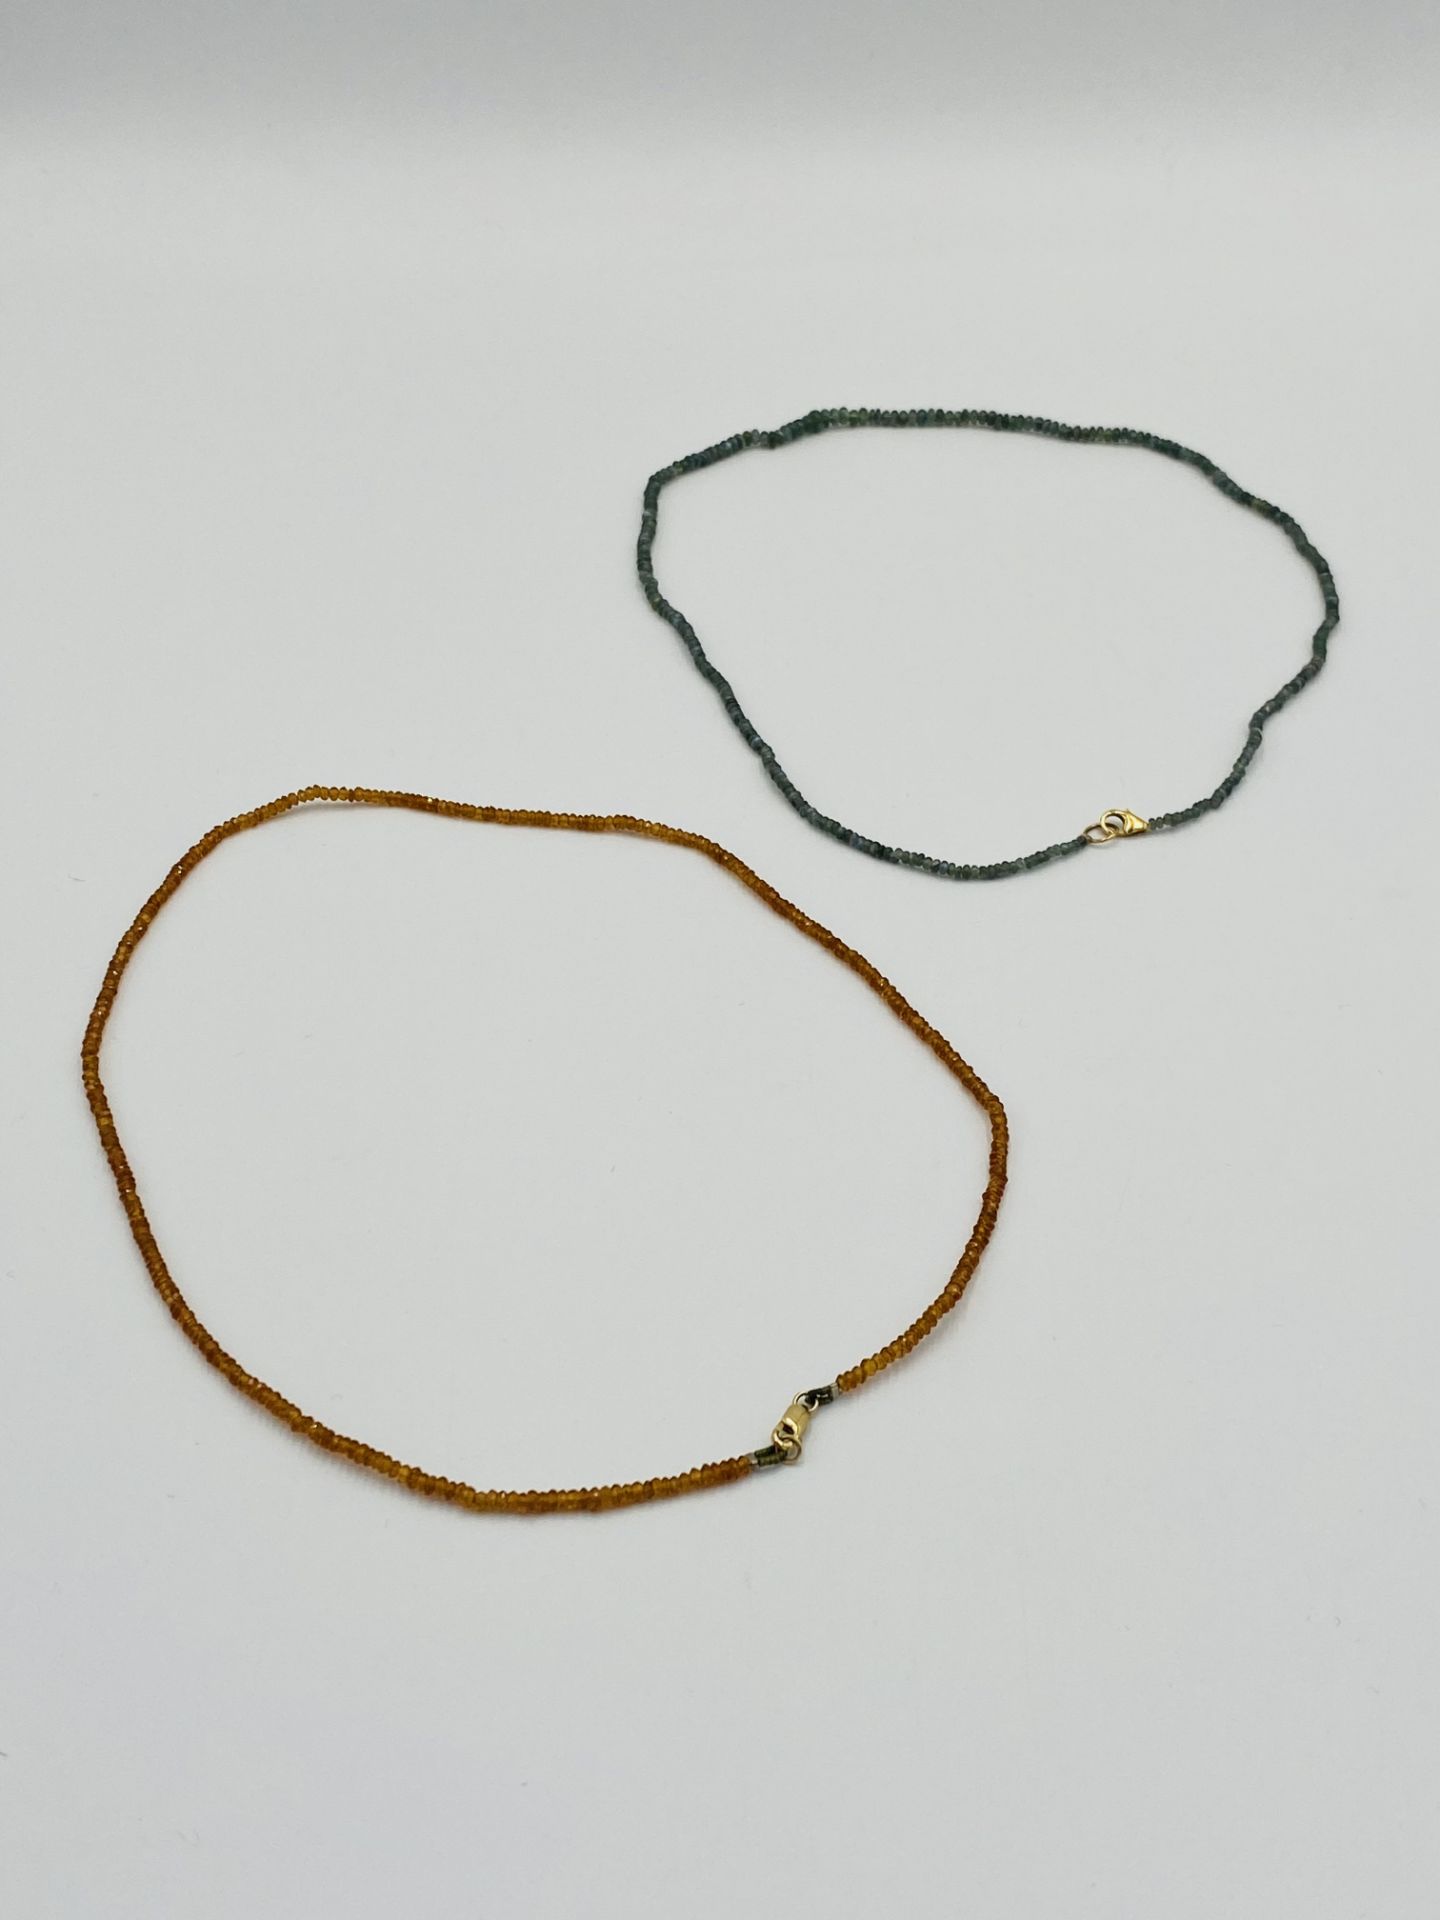 Two beaded necklaces with 14ct gold clasps - Image 4 of 6